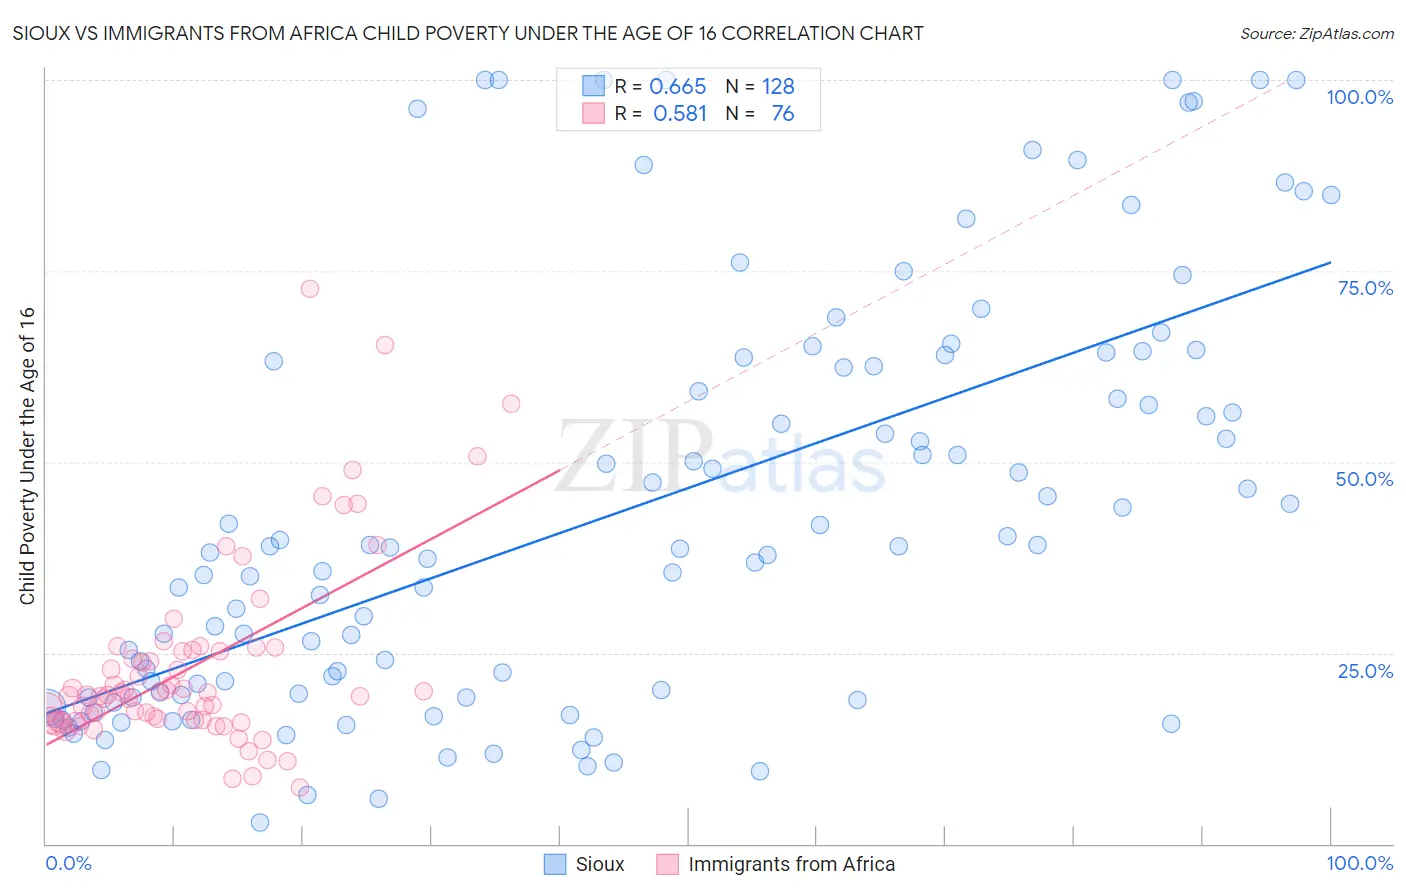 Sioux vs Immigrants from Africa Child Poverty Under the Age of 16